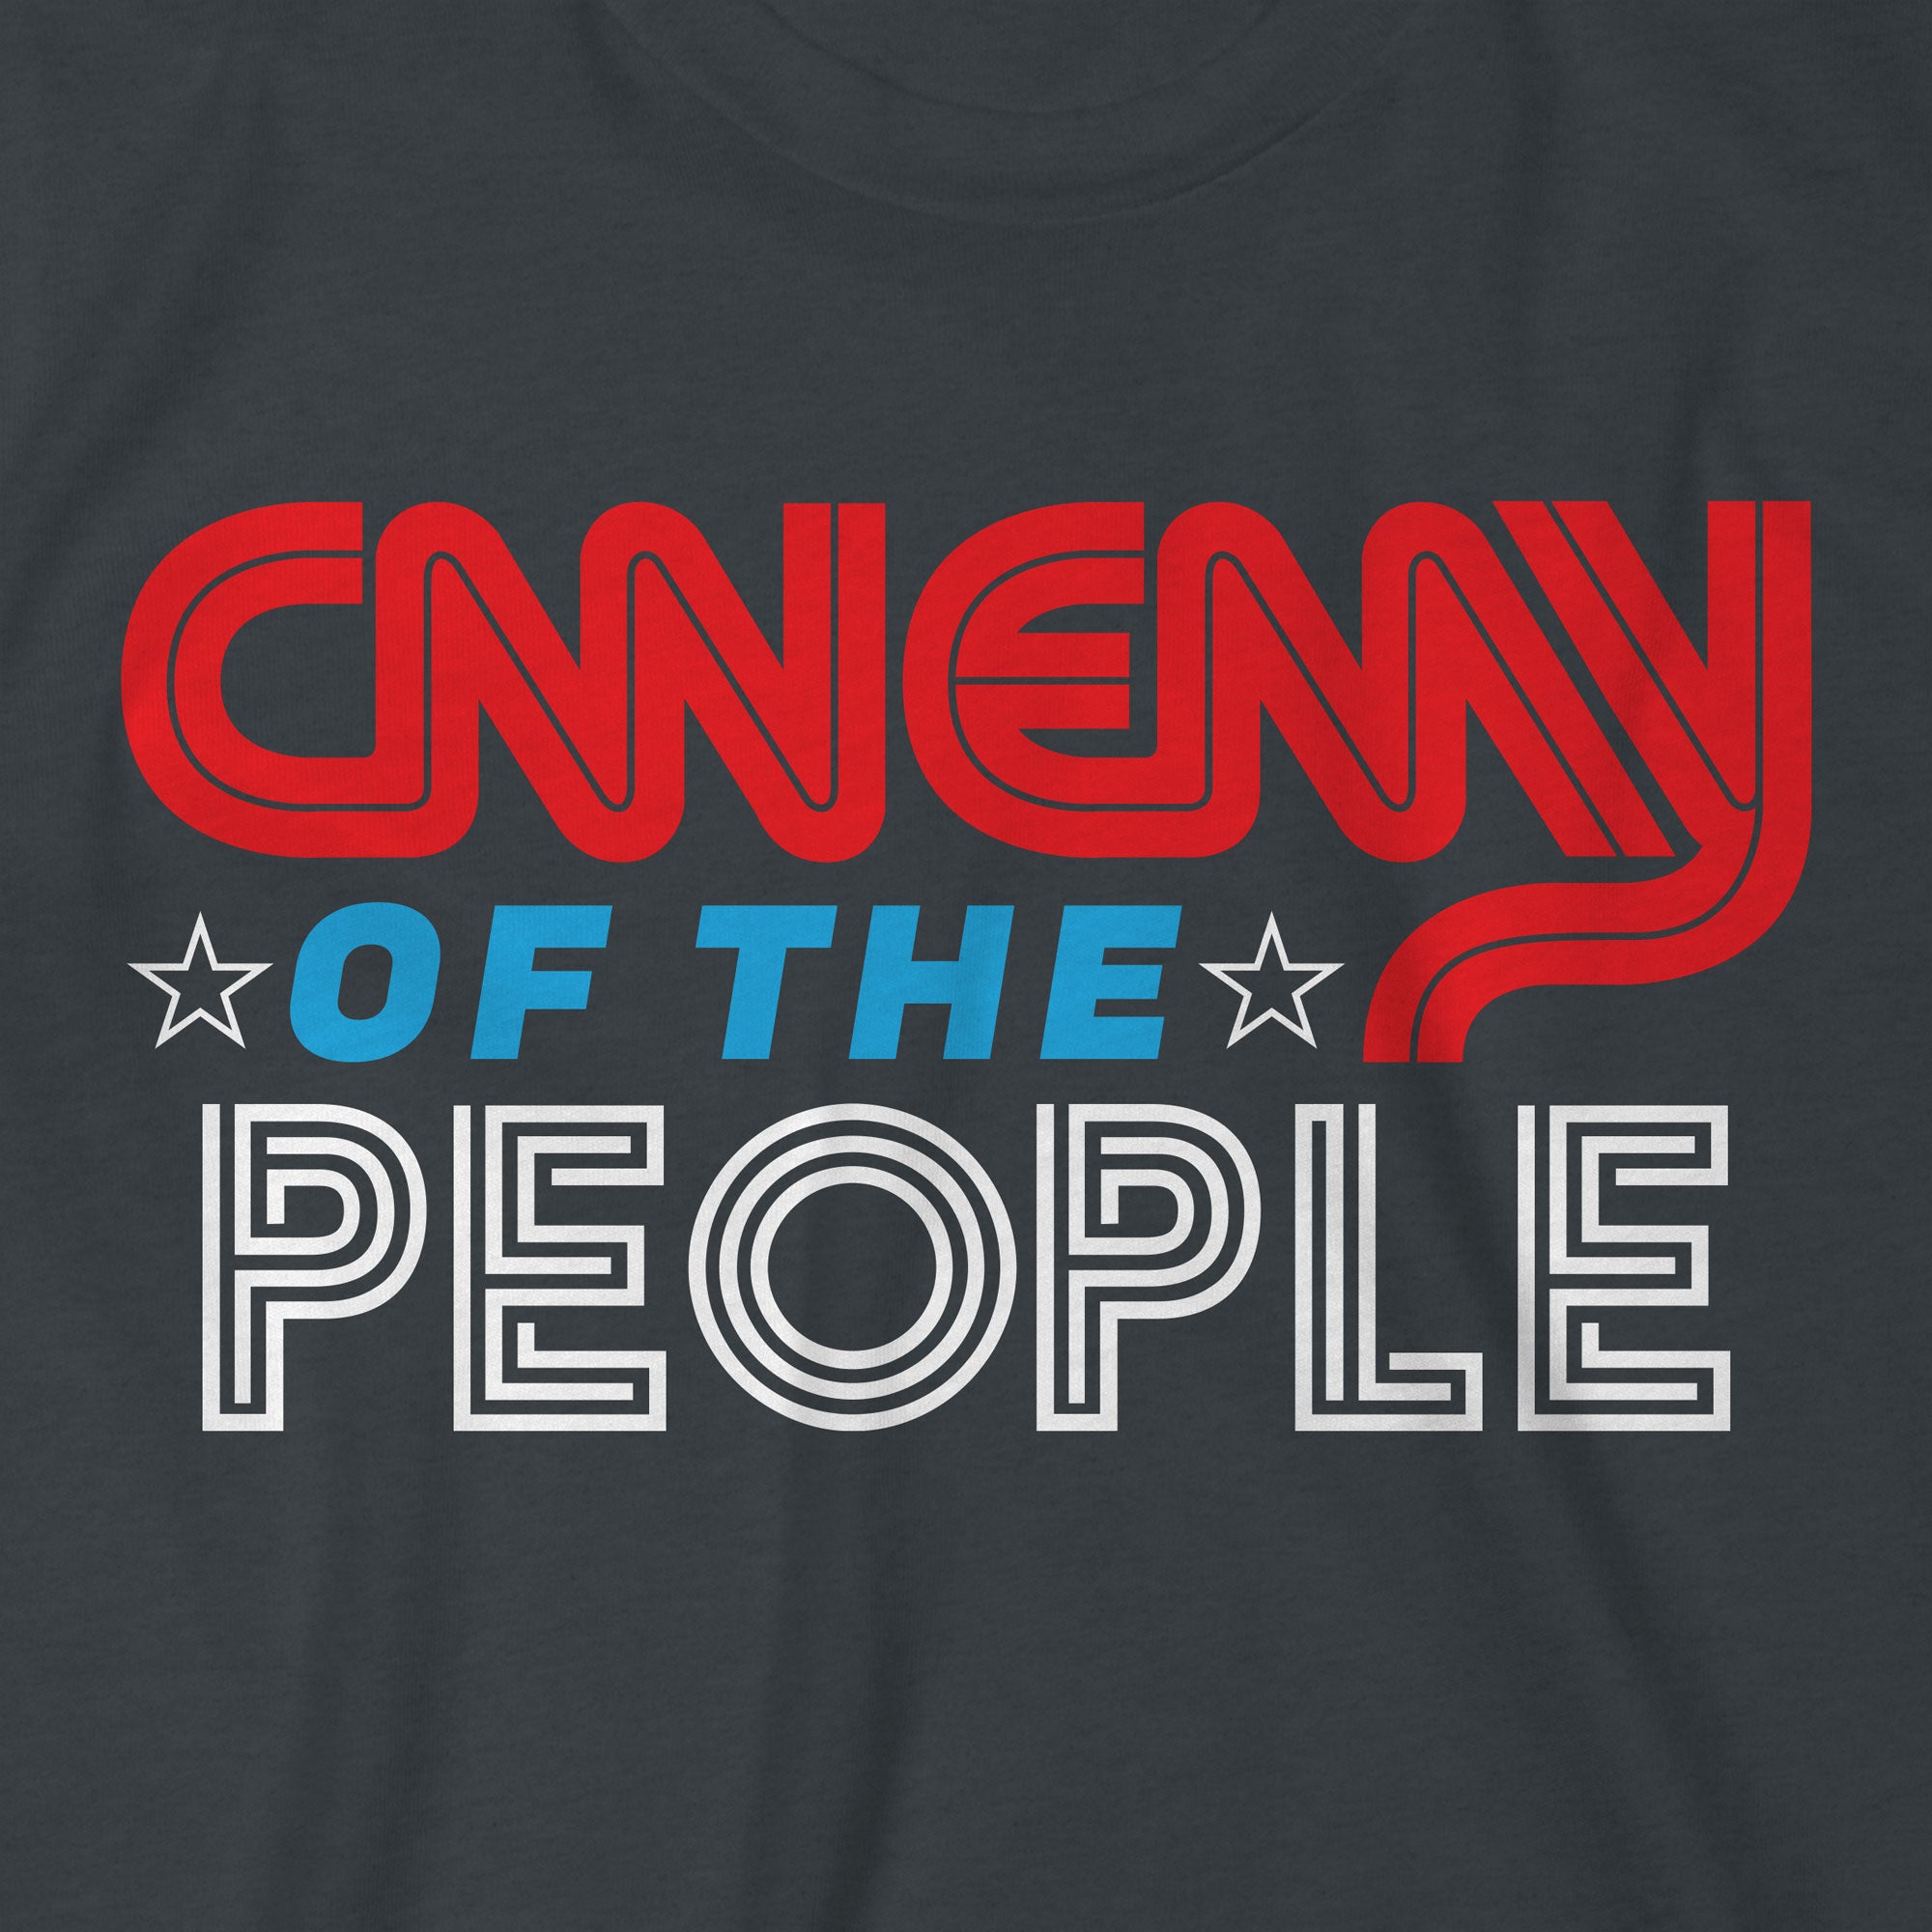 CNN Enemy Of The People T-Shirt